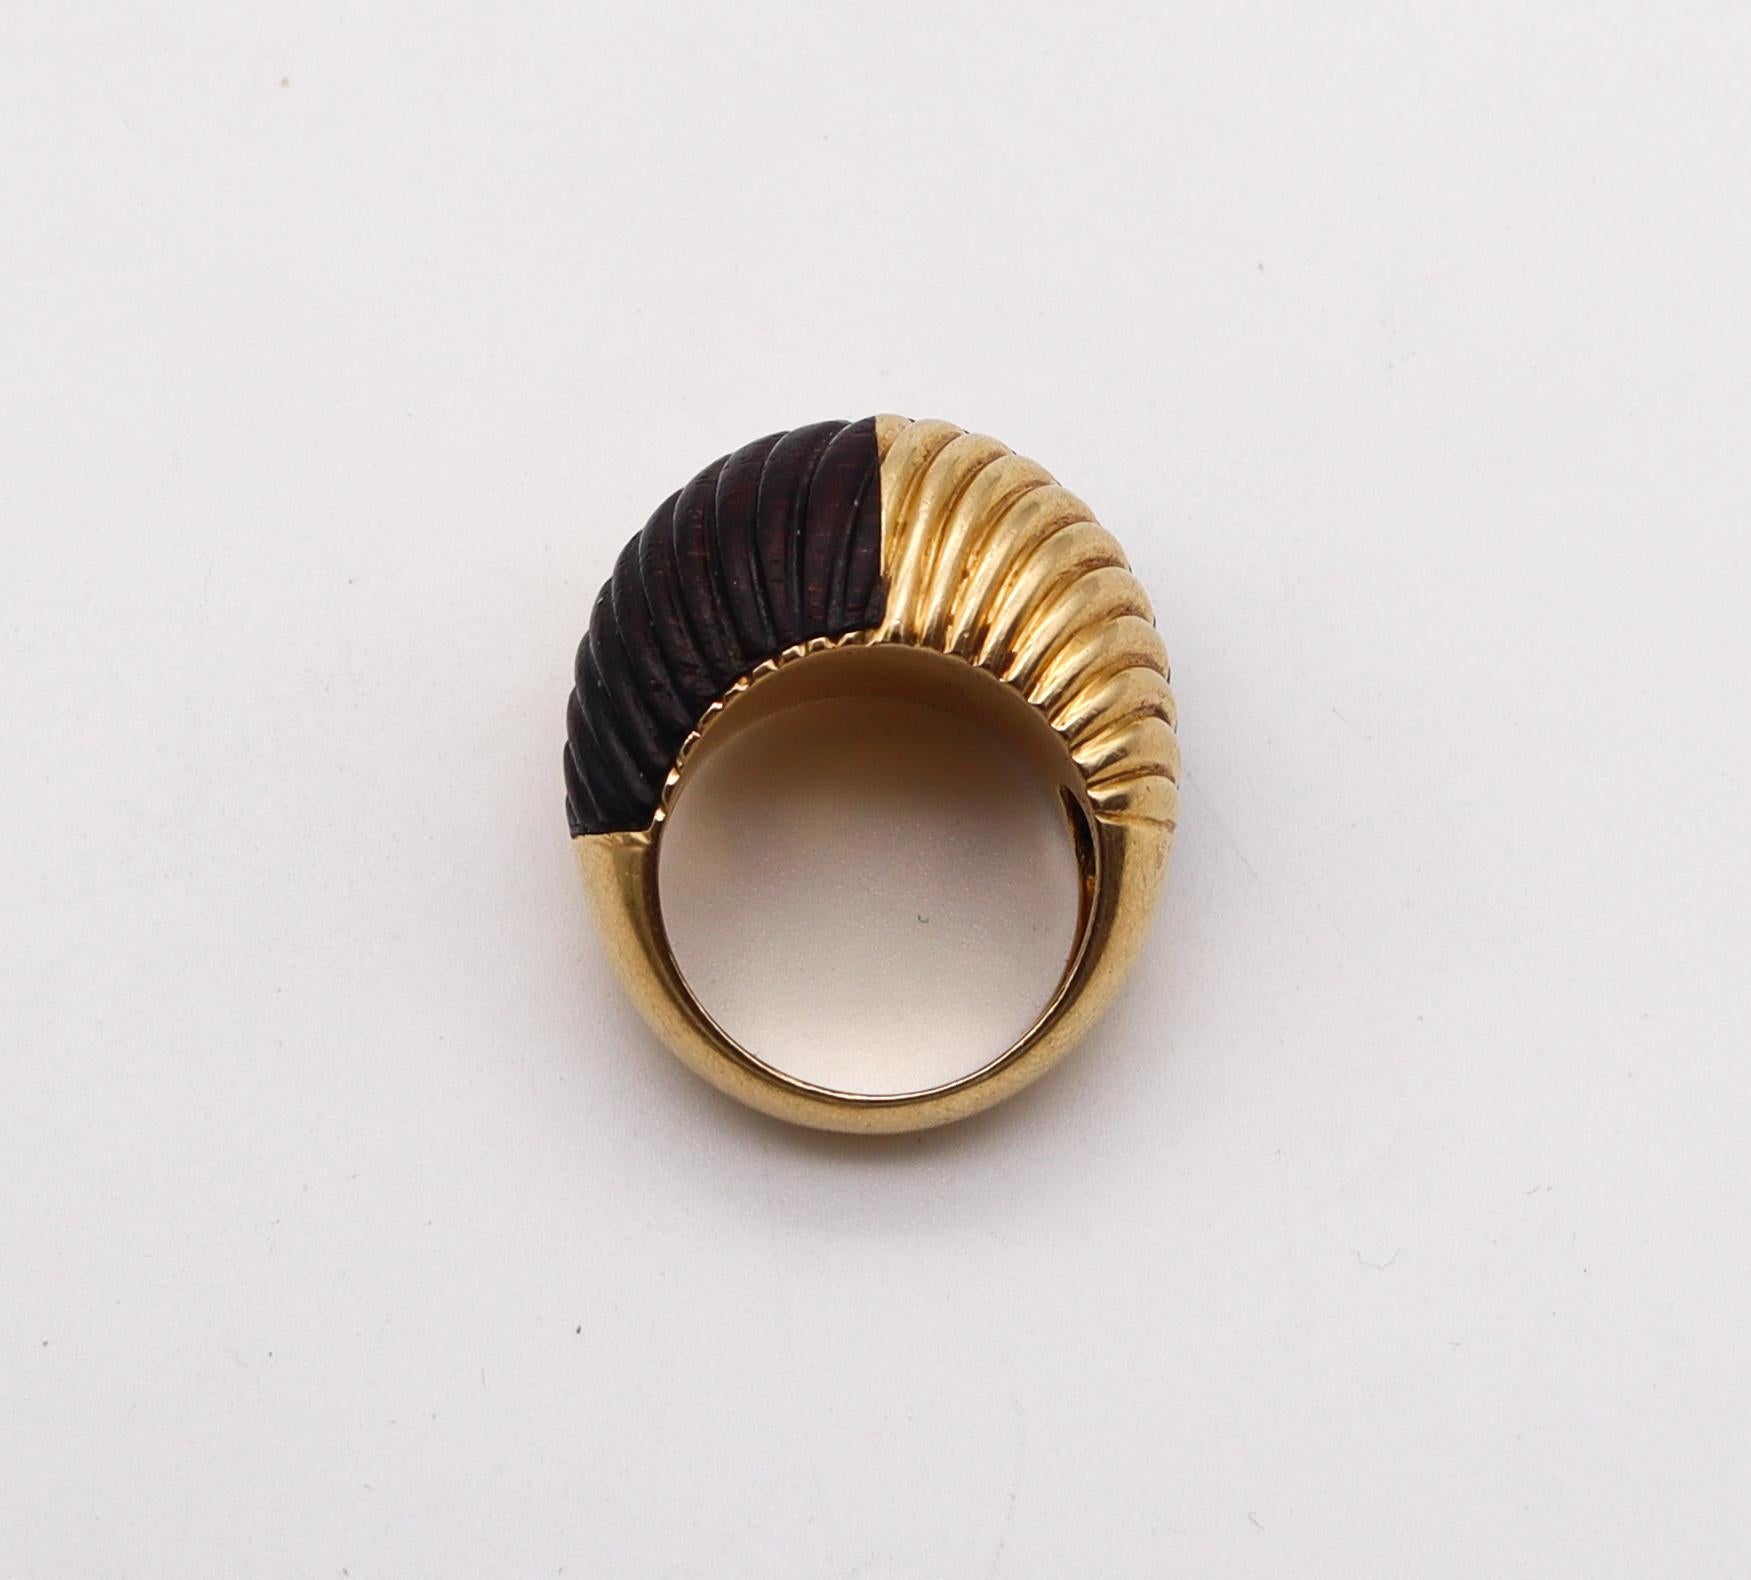 Van Cleef & Arpels 1970 Paris Bombe Wood Cocktail Ring in 18Kt Yellow Gold 2